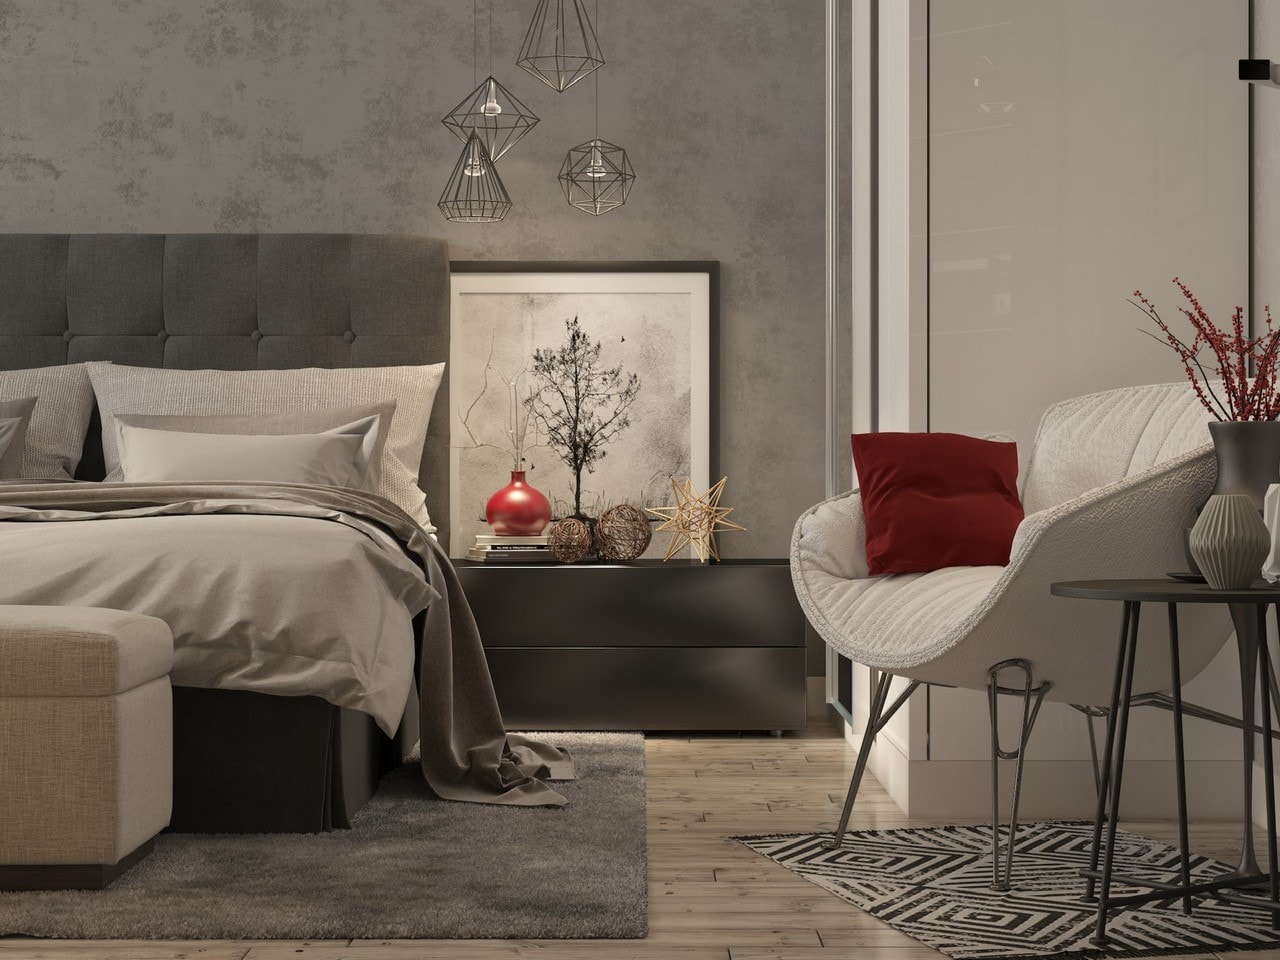 How to Design a Bedroom - warm looking bedroom with grey accents